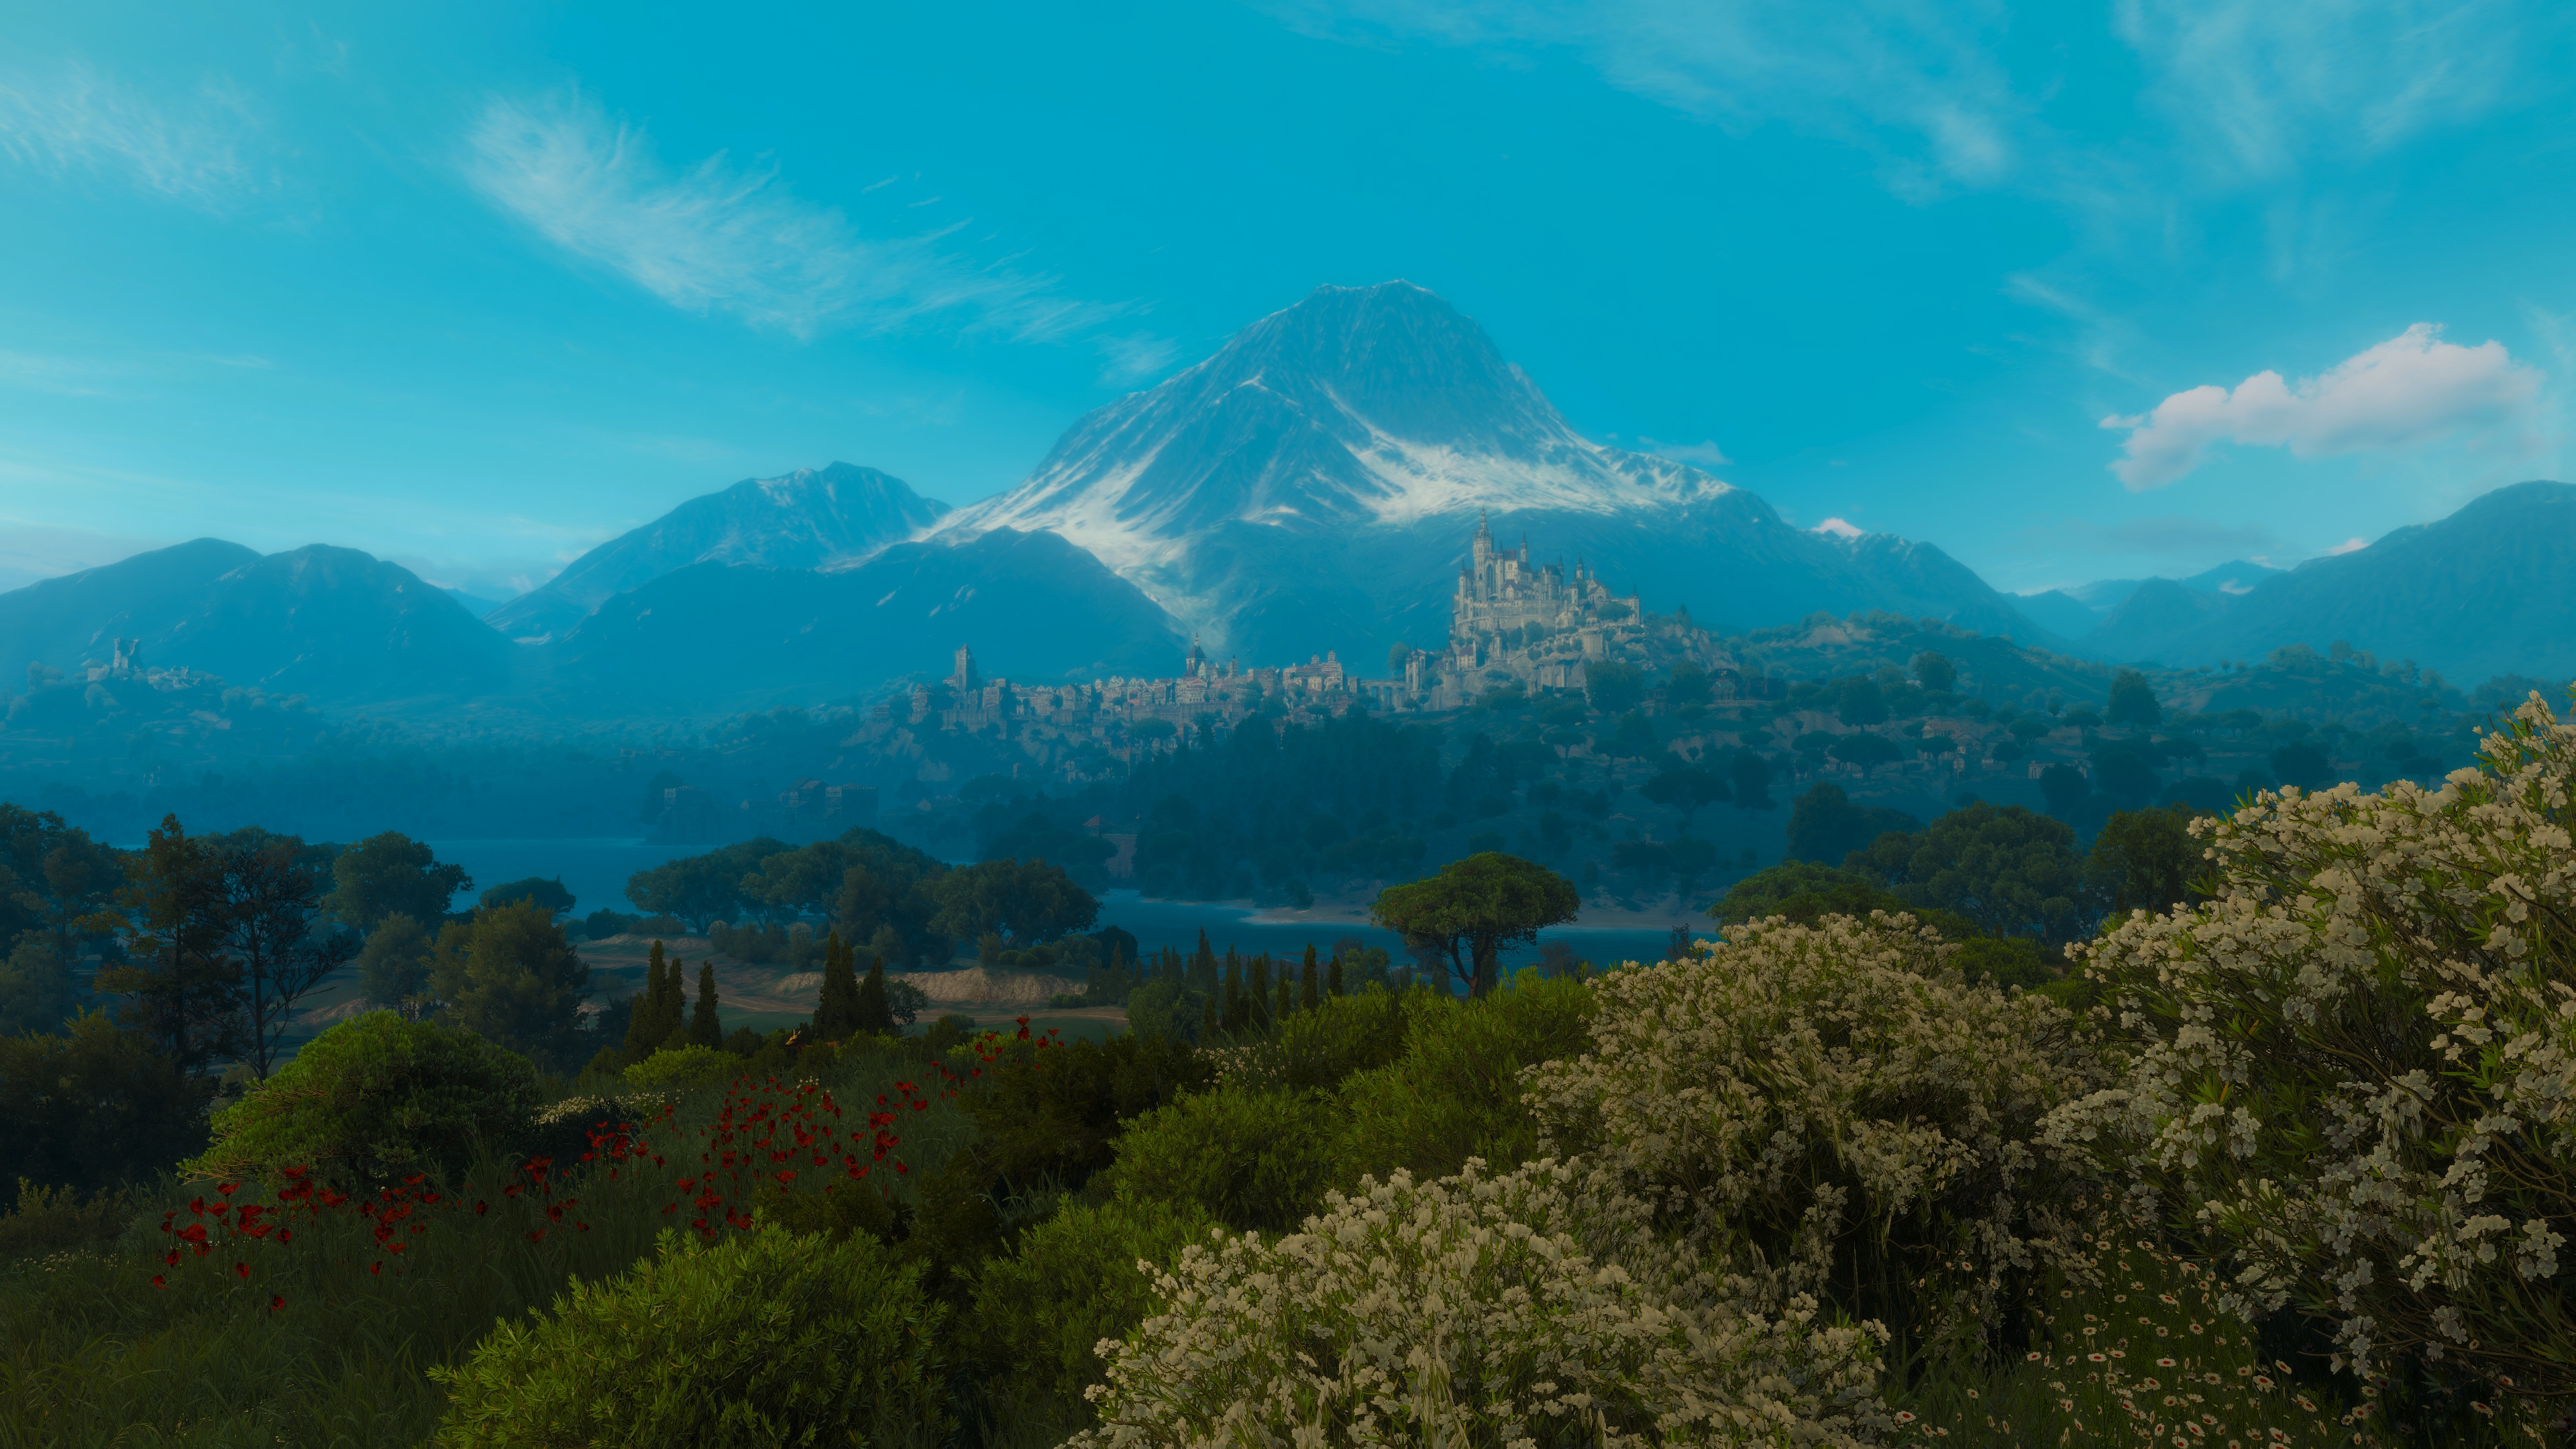 General 3840x2160 The Witcher 3: Wild Hunt PC gaming tussent mountains landscape The Witcher 3: Wild Hunt - Blood and Wine video game art screen shot video games nature trees sky CGI water